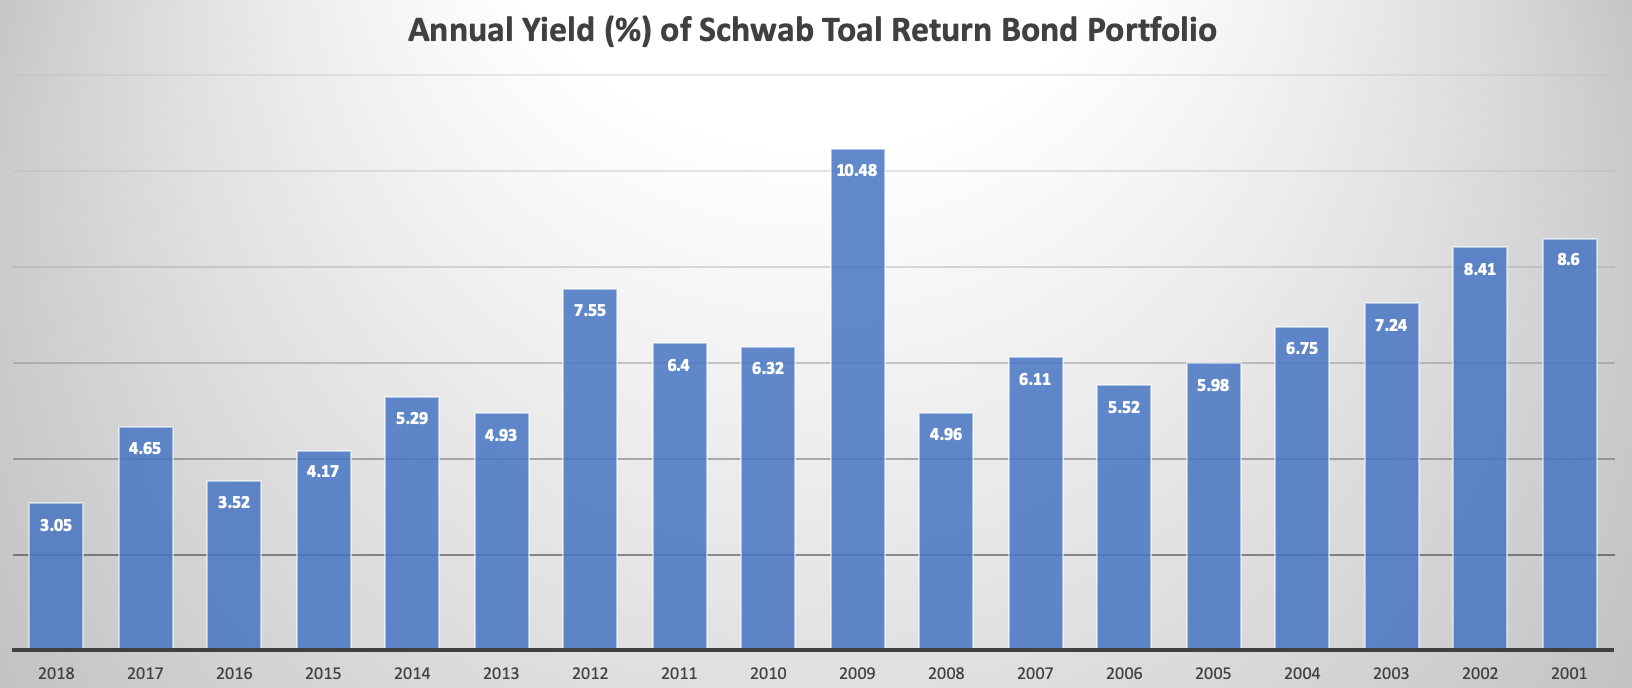 July 29, 2019: Fixed Income Portfolios In A Lower Yield Environment